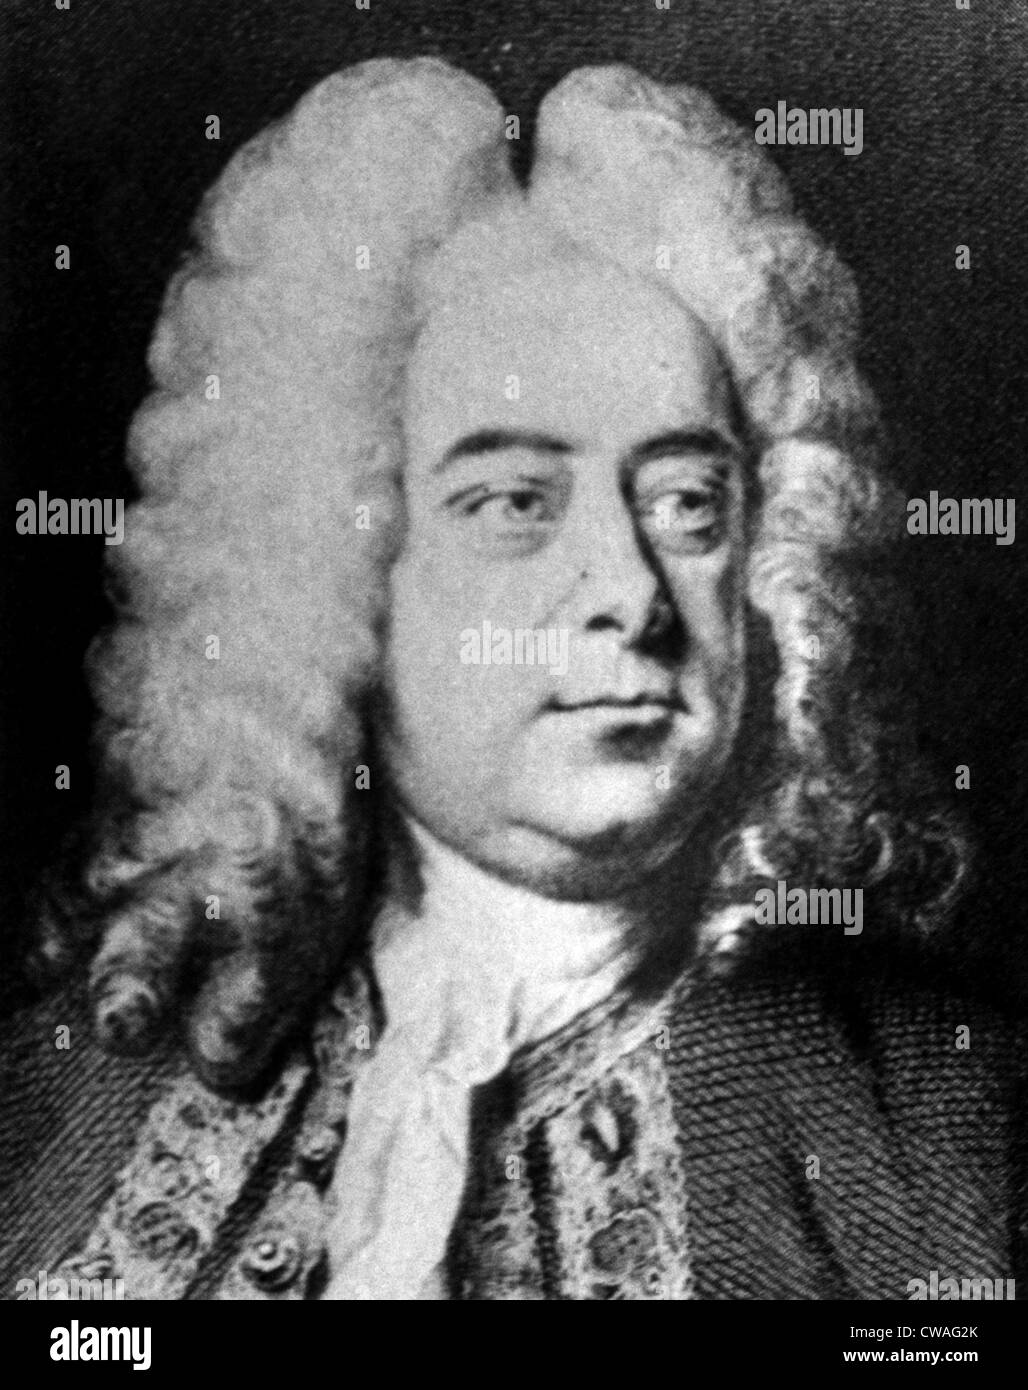 Classical composer George Frideric Handel.(1685-1759). Courtesy: CSU Archives/Everett Collection. Stock Photo